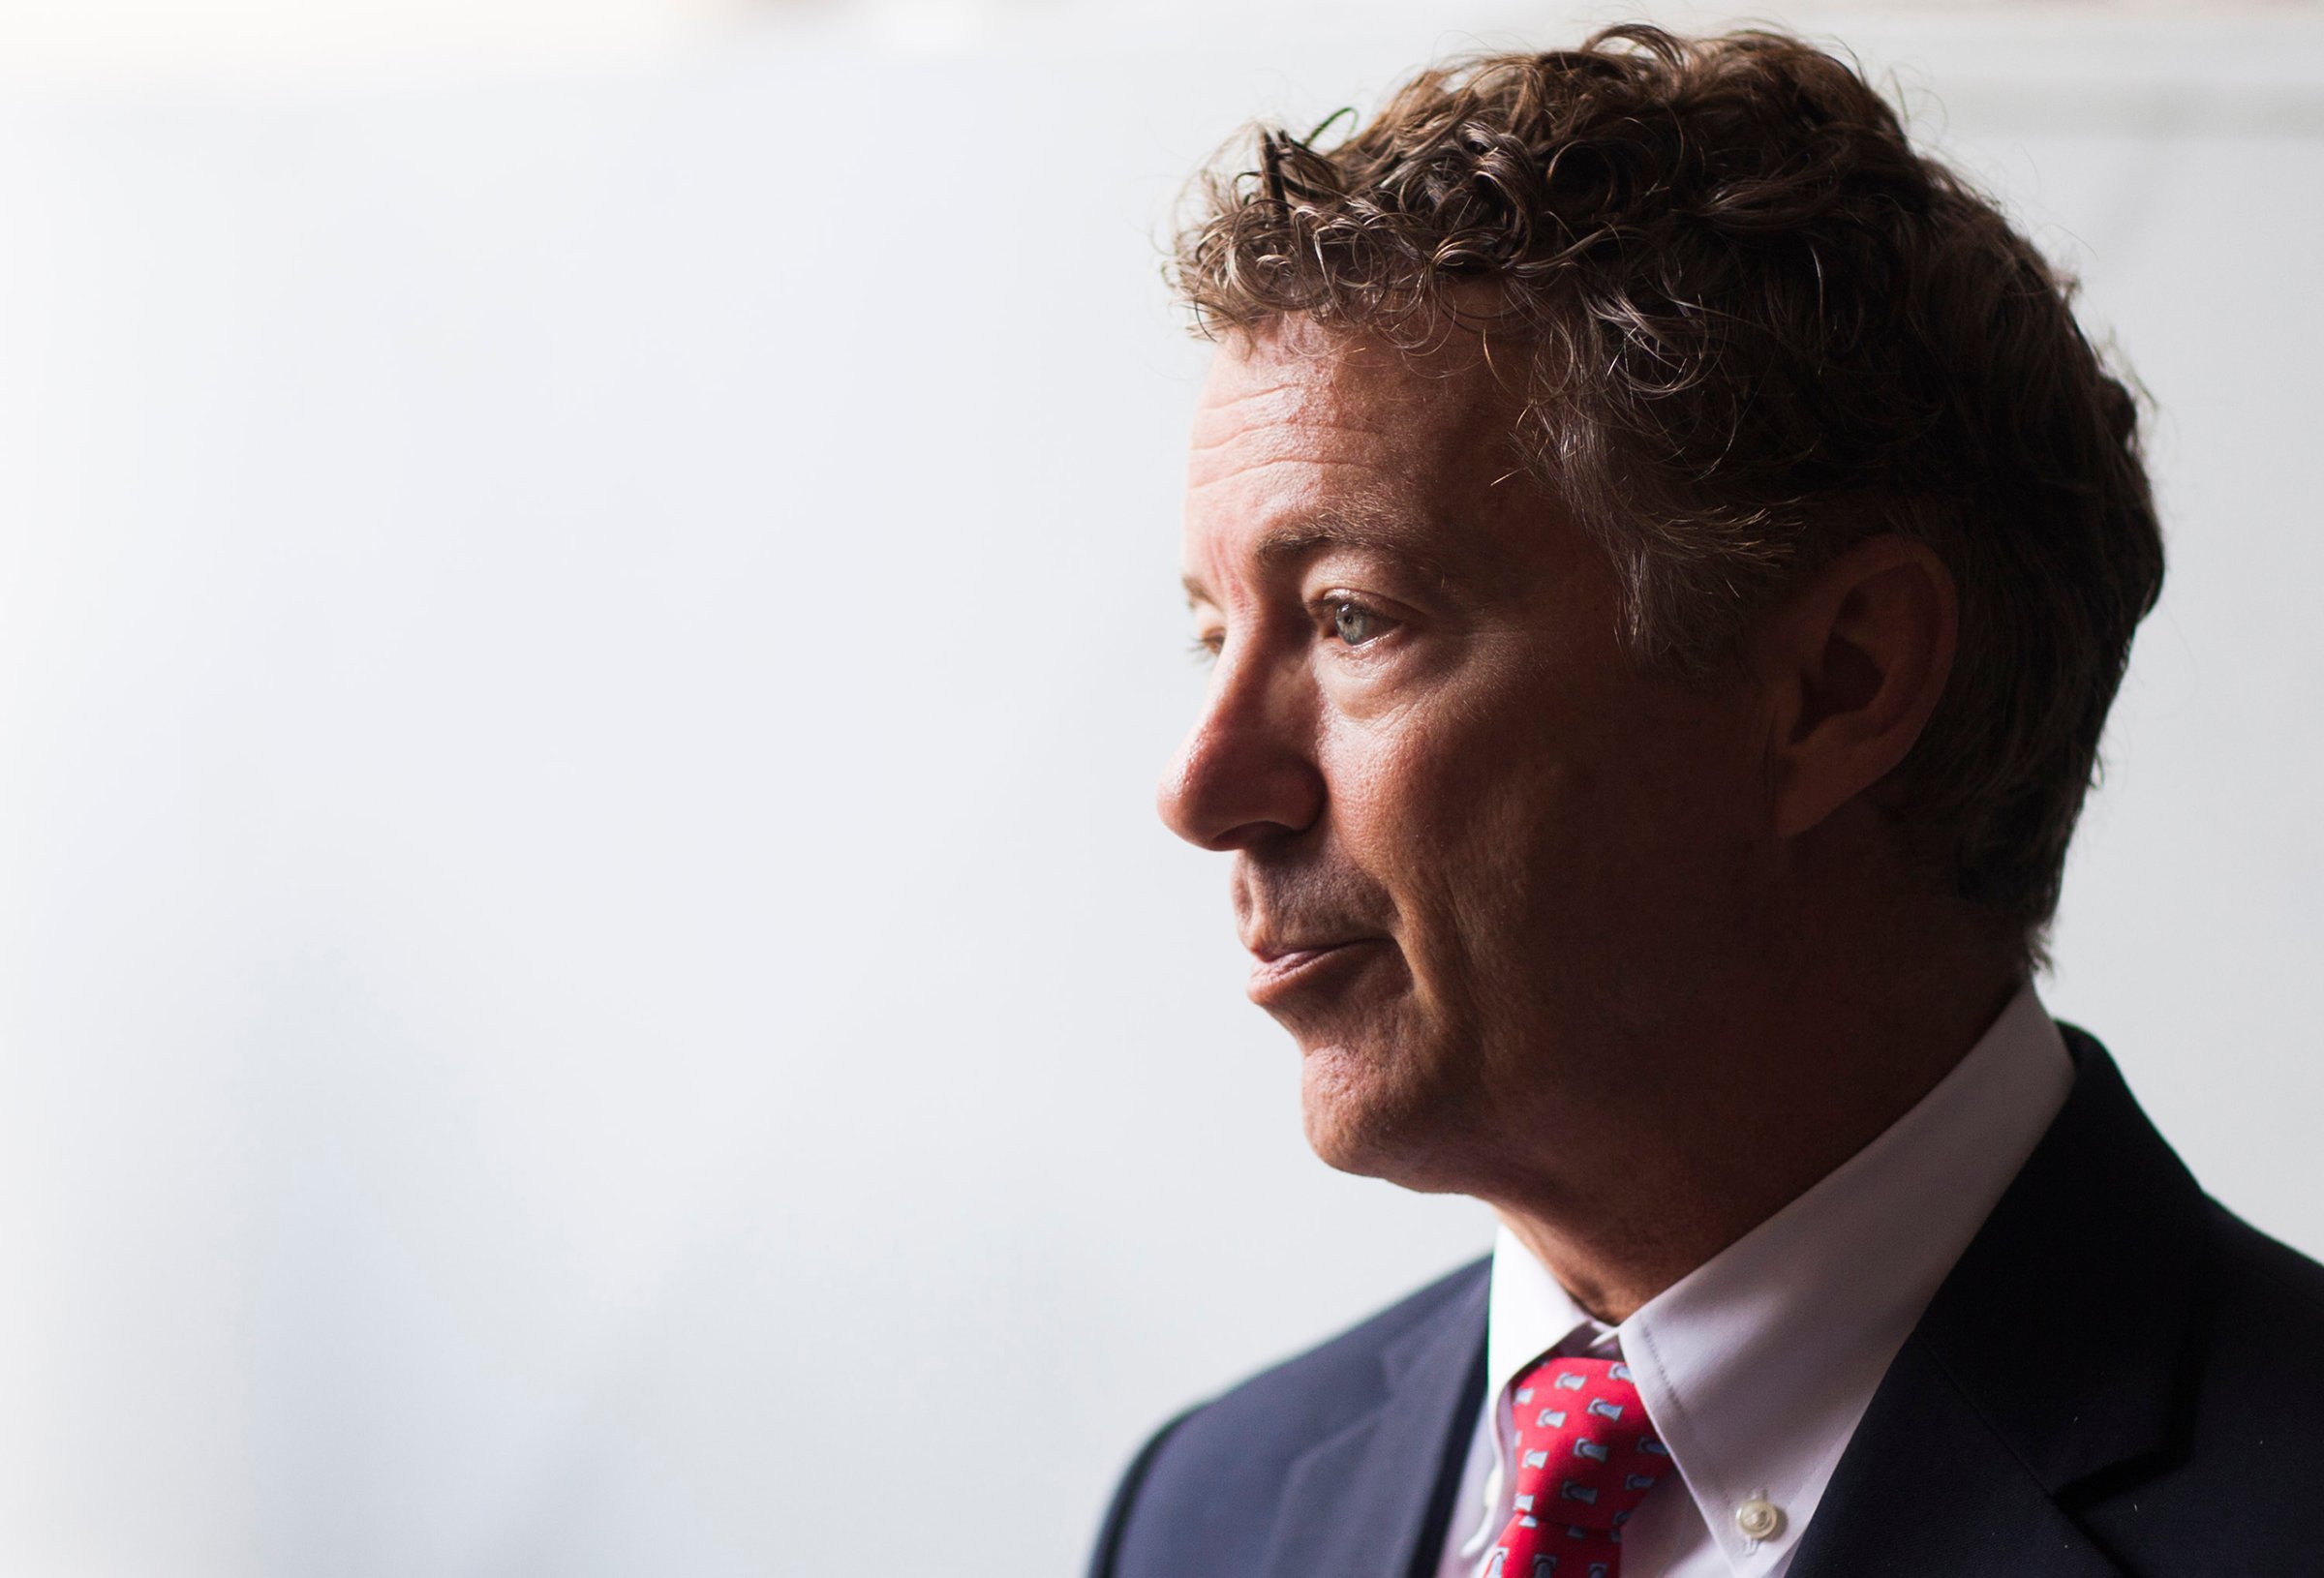 Sen. Rand Paul answers questions from the media after speaking to students at Western Kentucky University on Monday, Oct. 3, 2016, in the Grise Hall auditorium in Bowling Green, Ky.